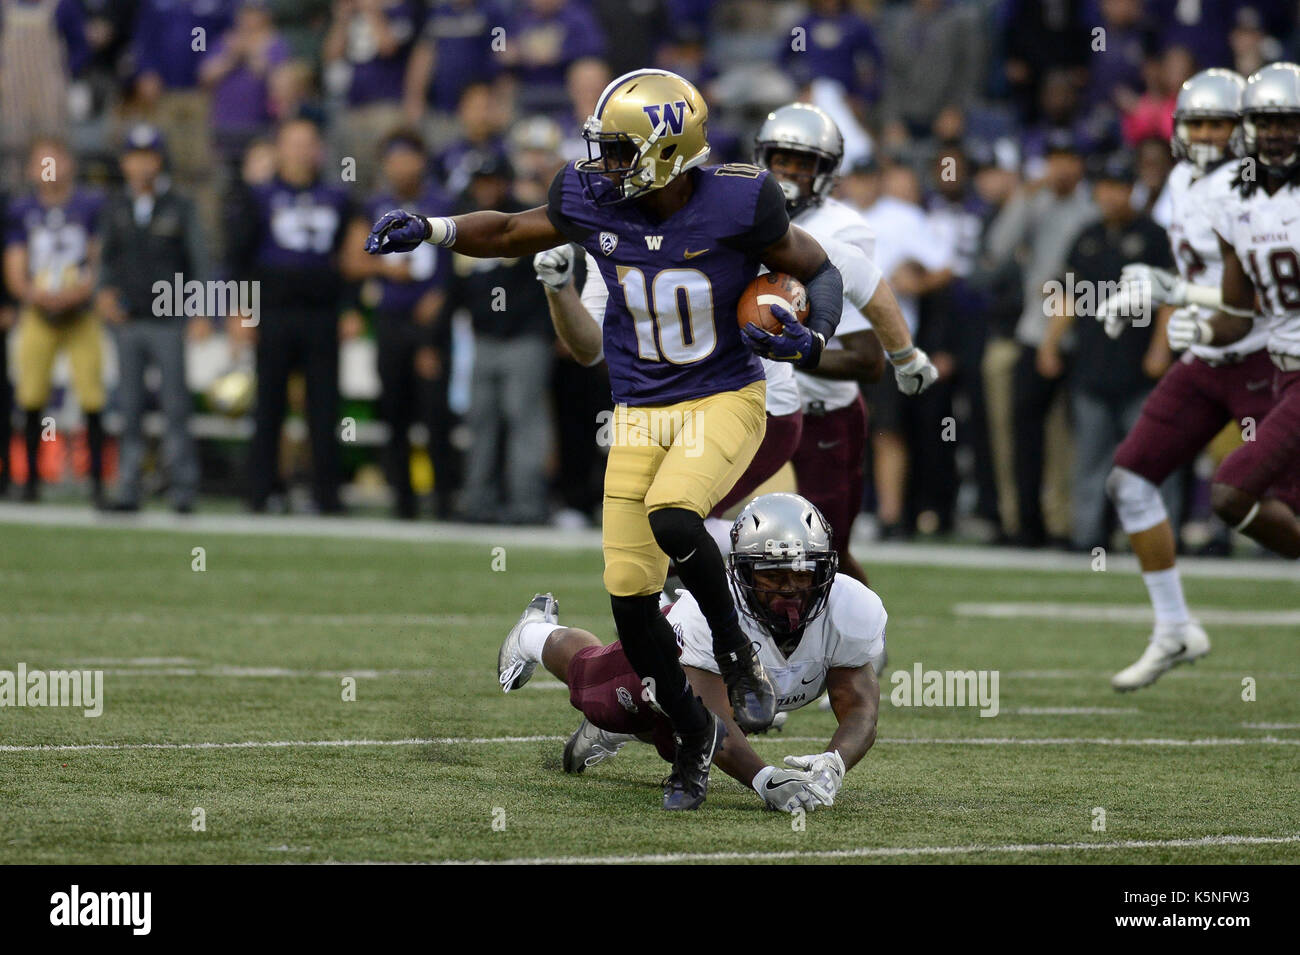 Seattle, WA, USA. 9th Sep, 2017. UW defensive back Jomon Dotson (10) avoids a tackle during his 68 yard interception return for a touchdown in a game between the Montana Grizzlies and the Washington Huskies. The game was played at Husky Stadium on the University of Washington campus in Seattle, WA. Jeff Halstead/CSM/Alamy Live News Stock Photo